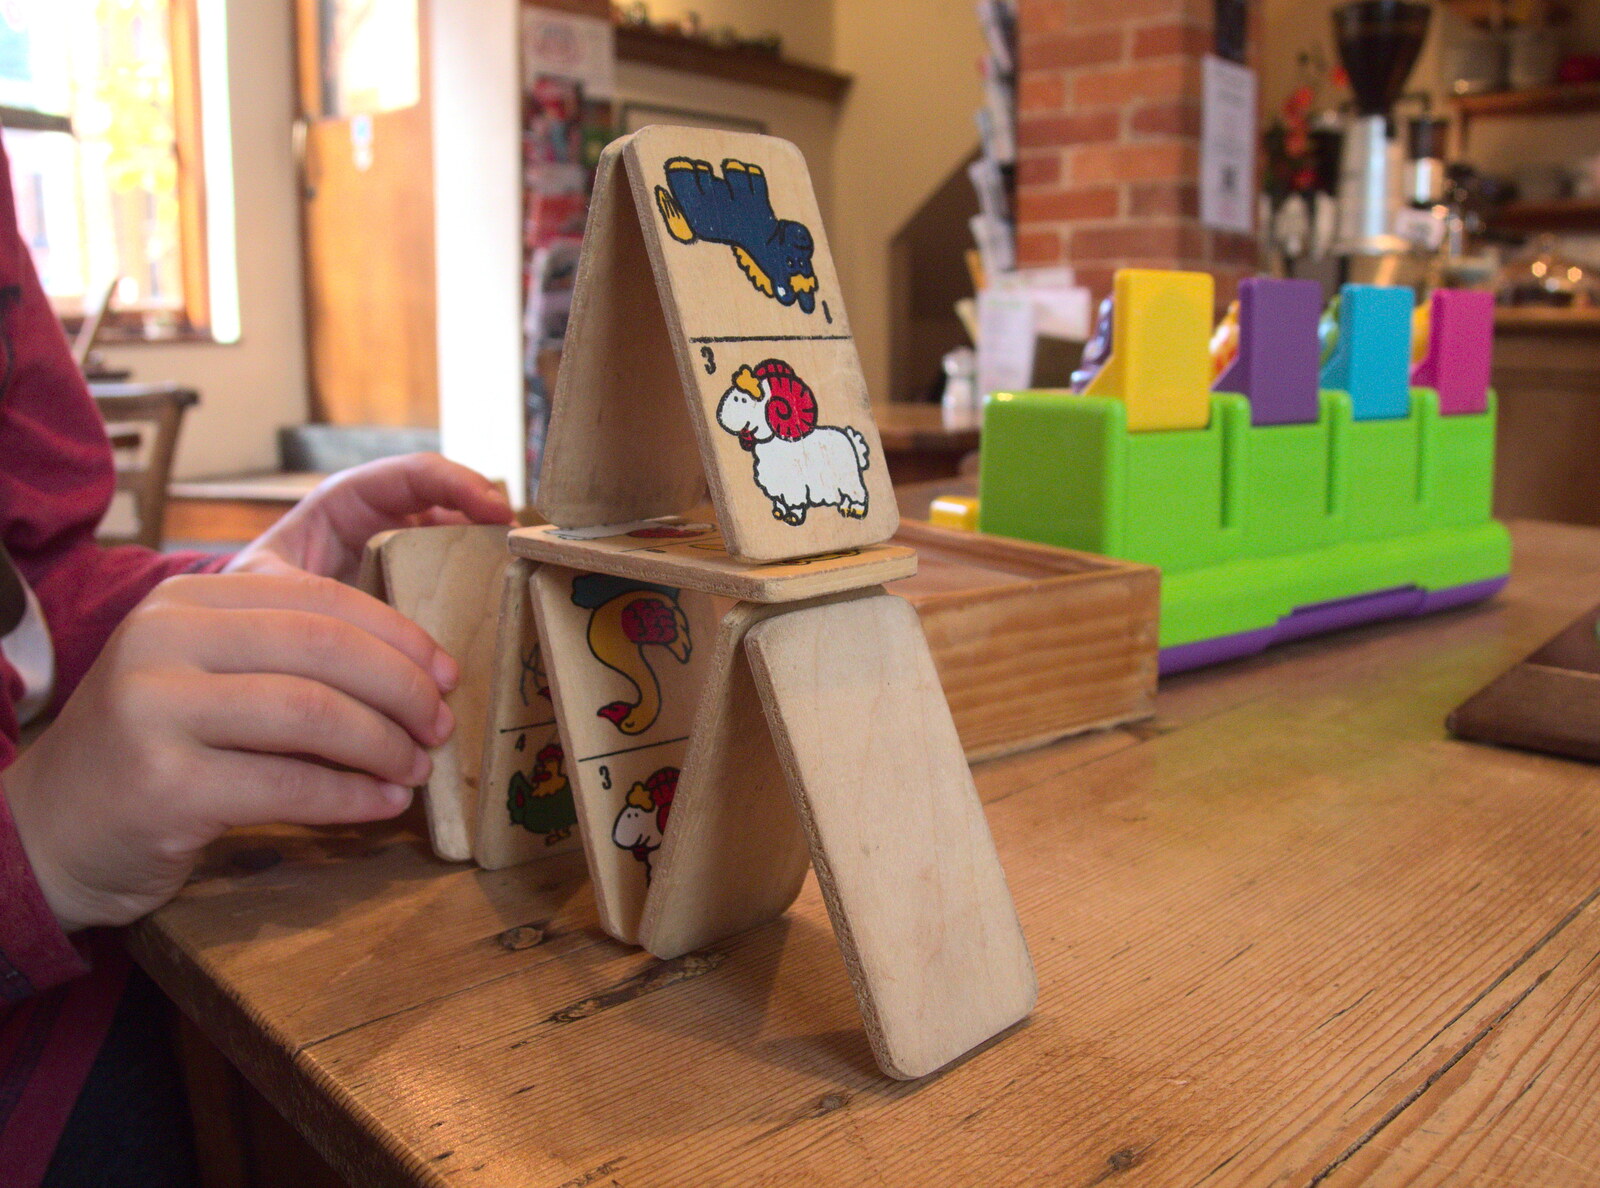 Fred makes a house of cards from John Willy's 65th and Other Stories, The Swan, Brome, Suffolk - 31st October 2015